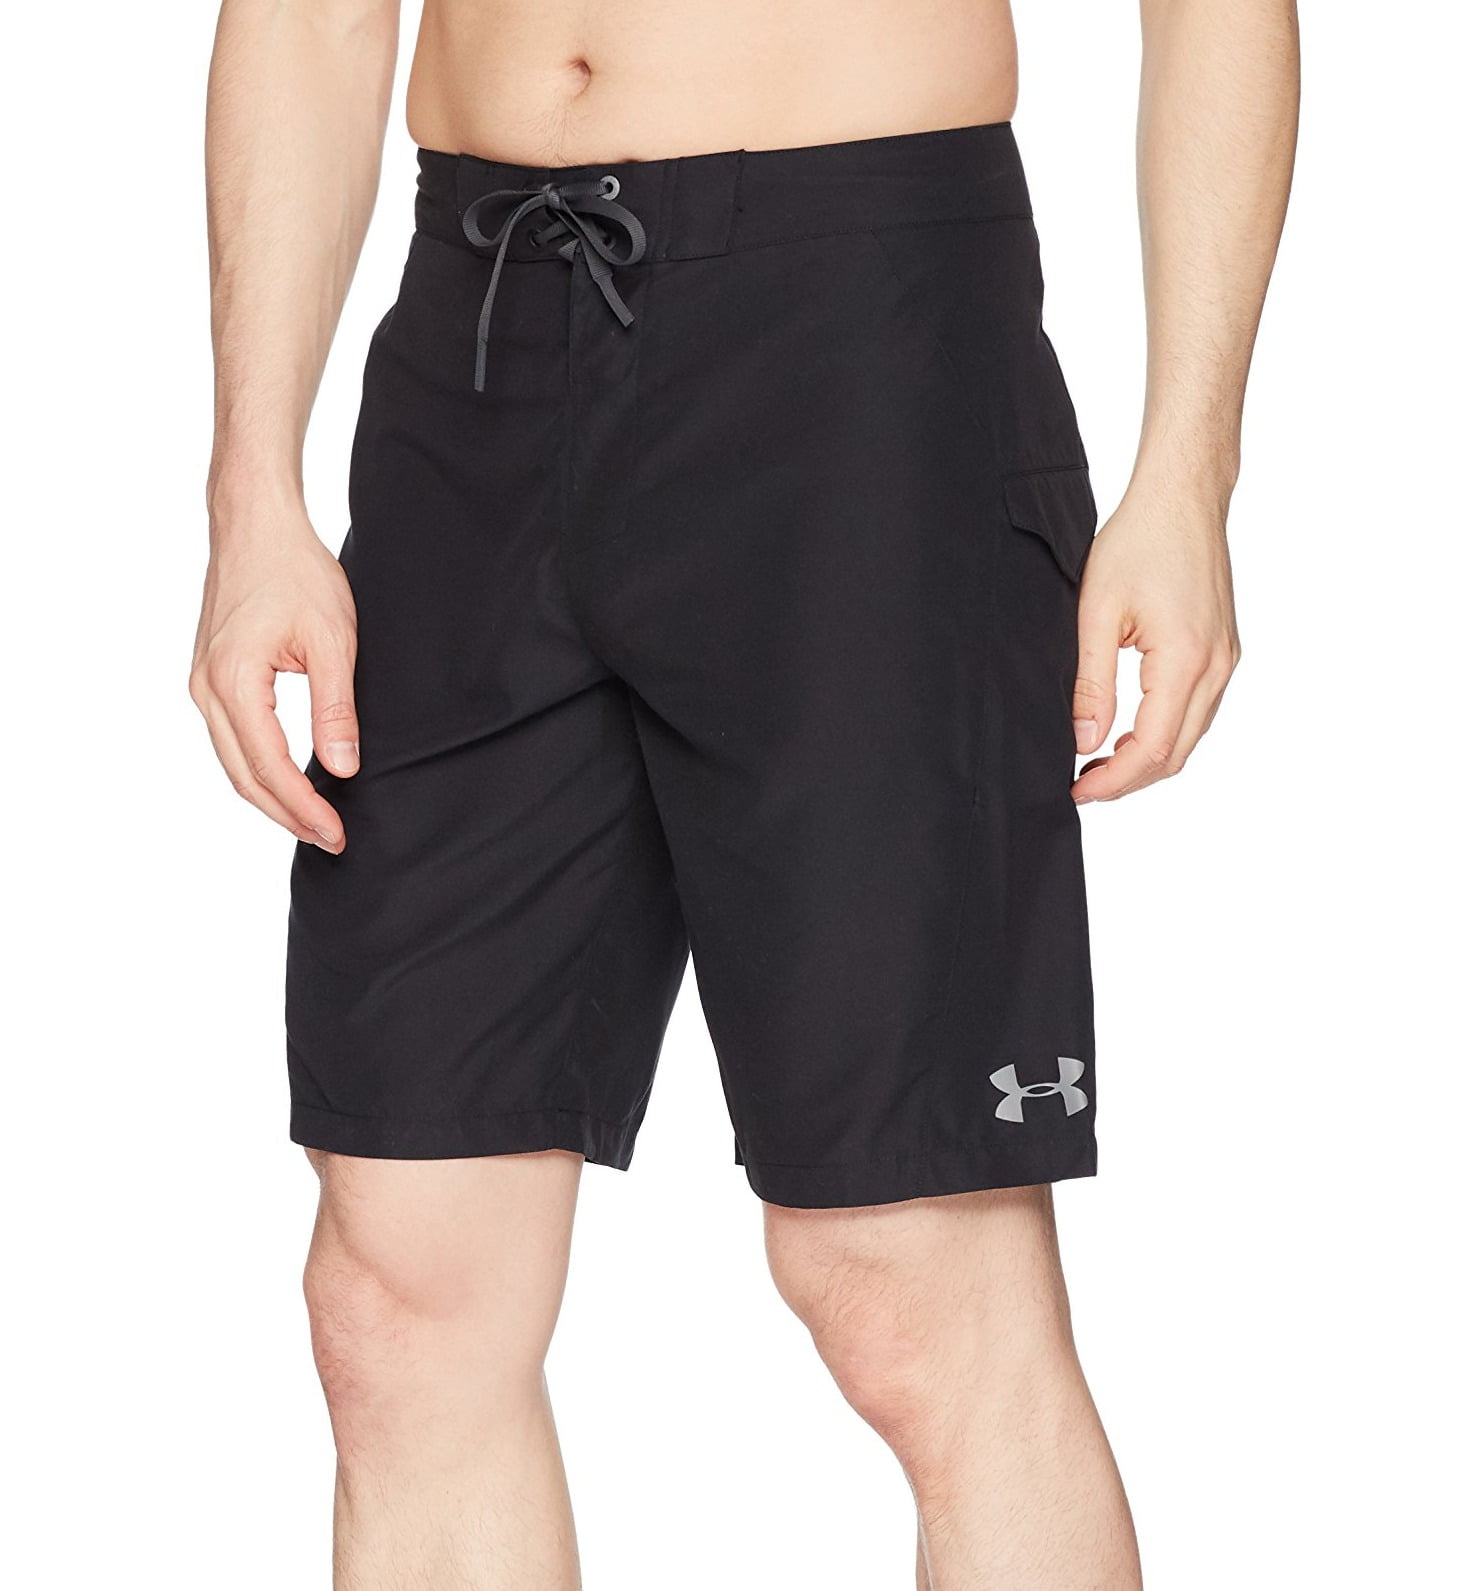 Stealth Grey Black New Under Armour Mania Tidal Boardshorts Graphite 